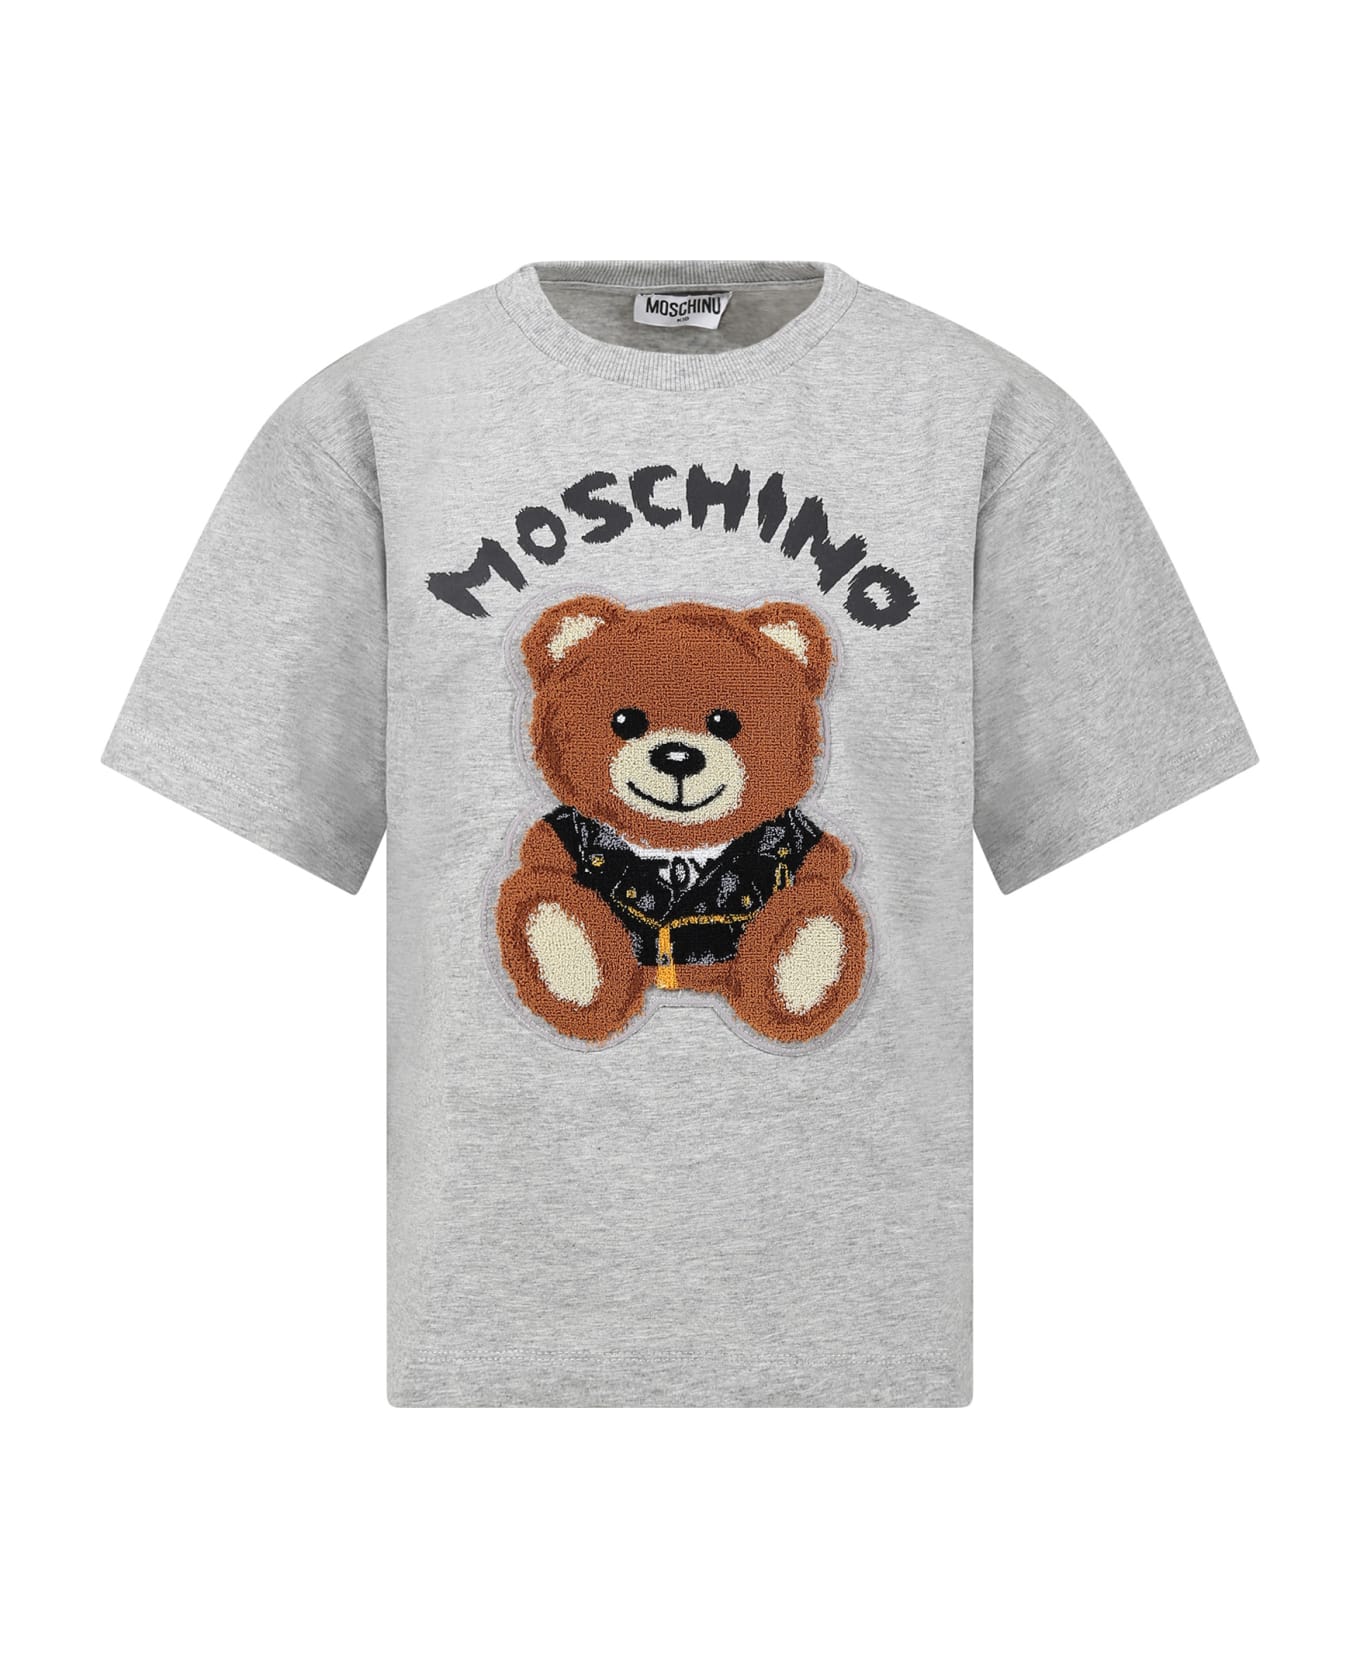 Moschino Gray T-shirt For Kids With Logo And Teddy Bear - Grey